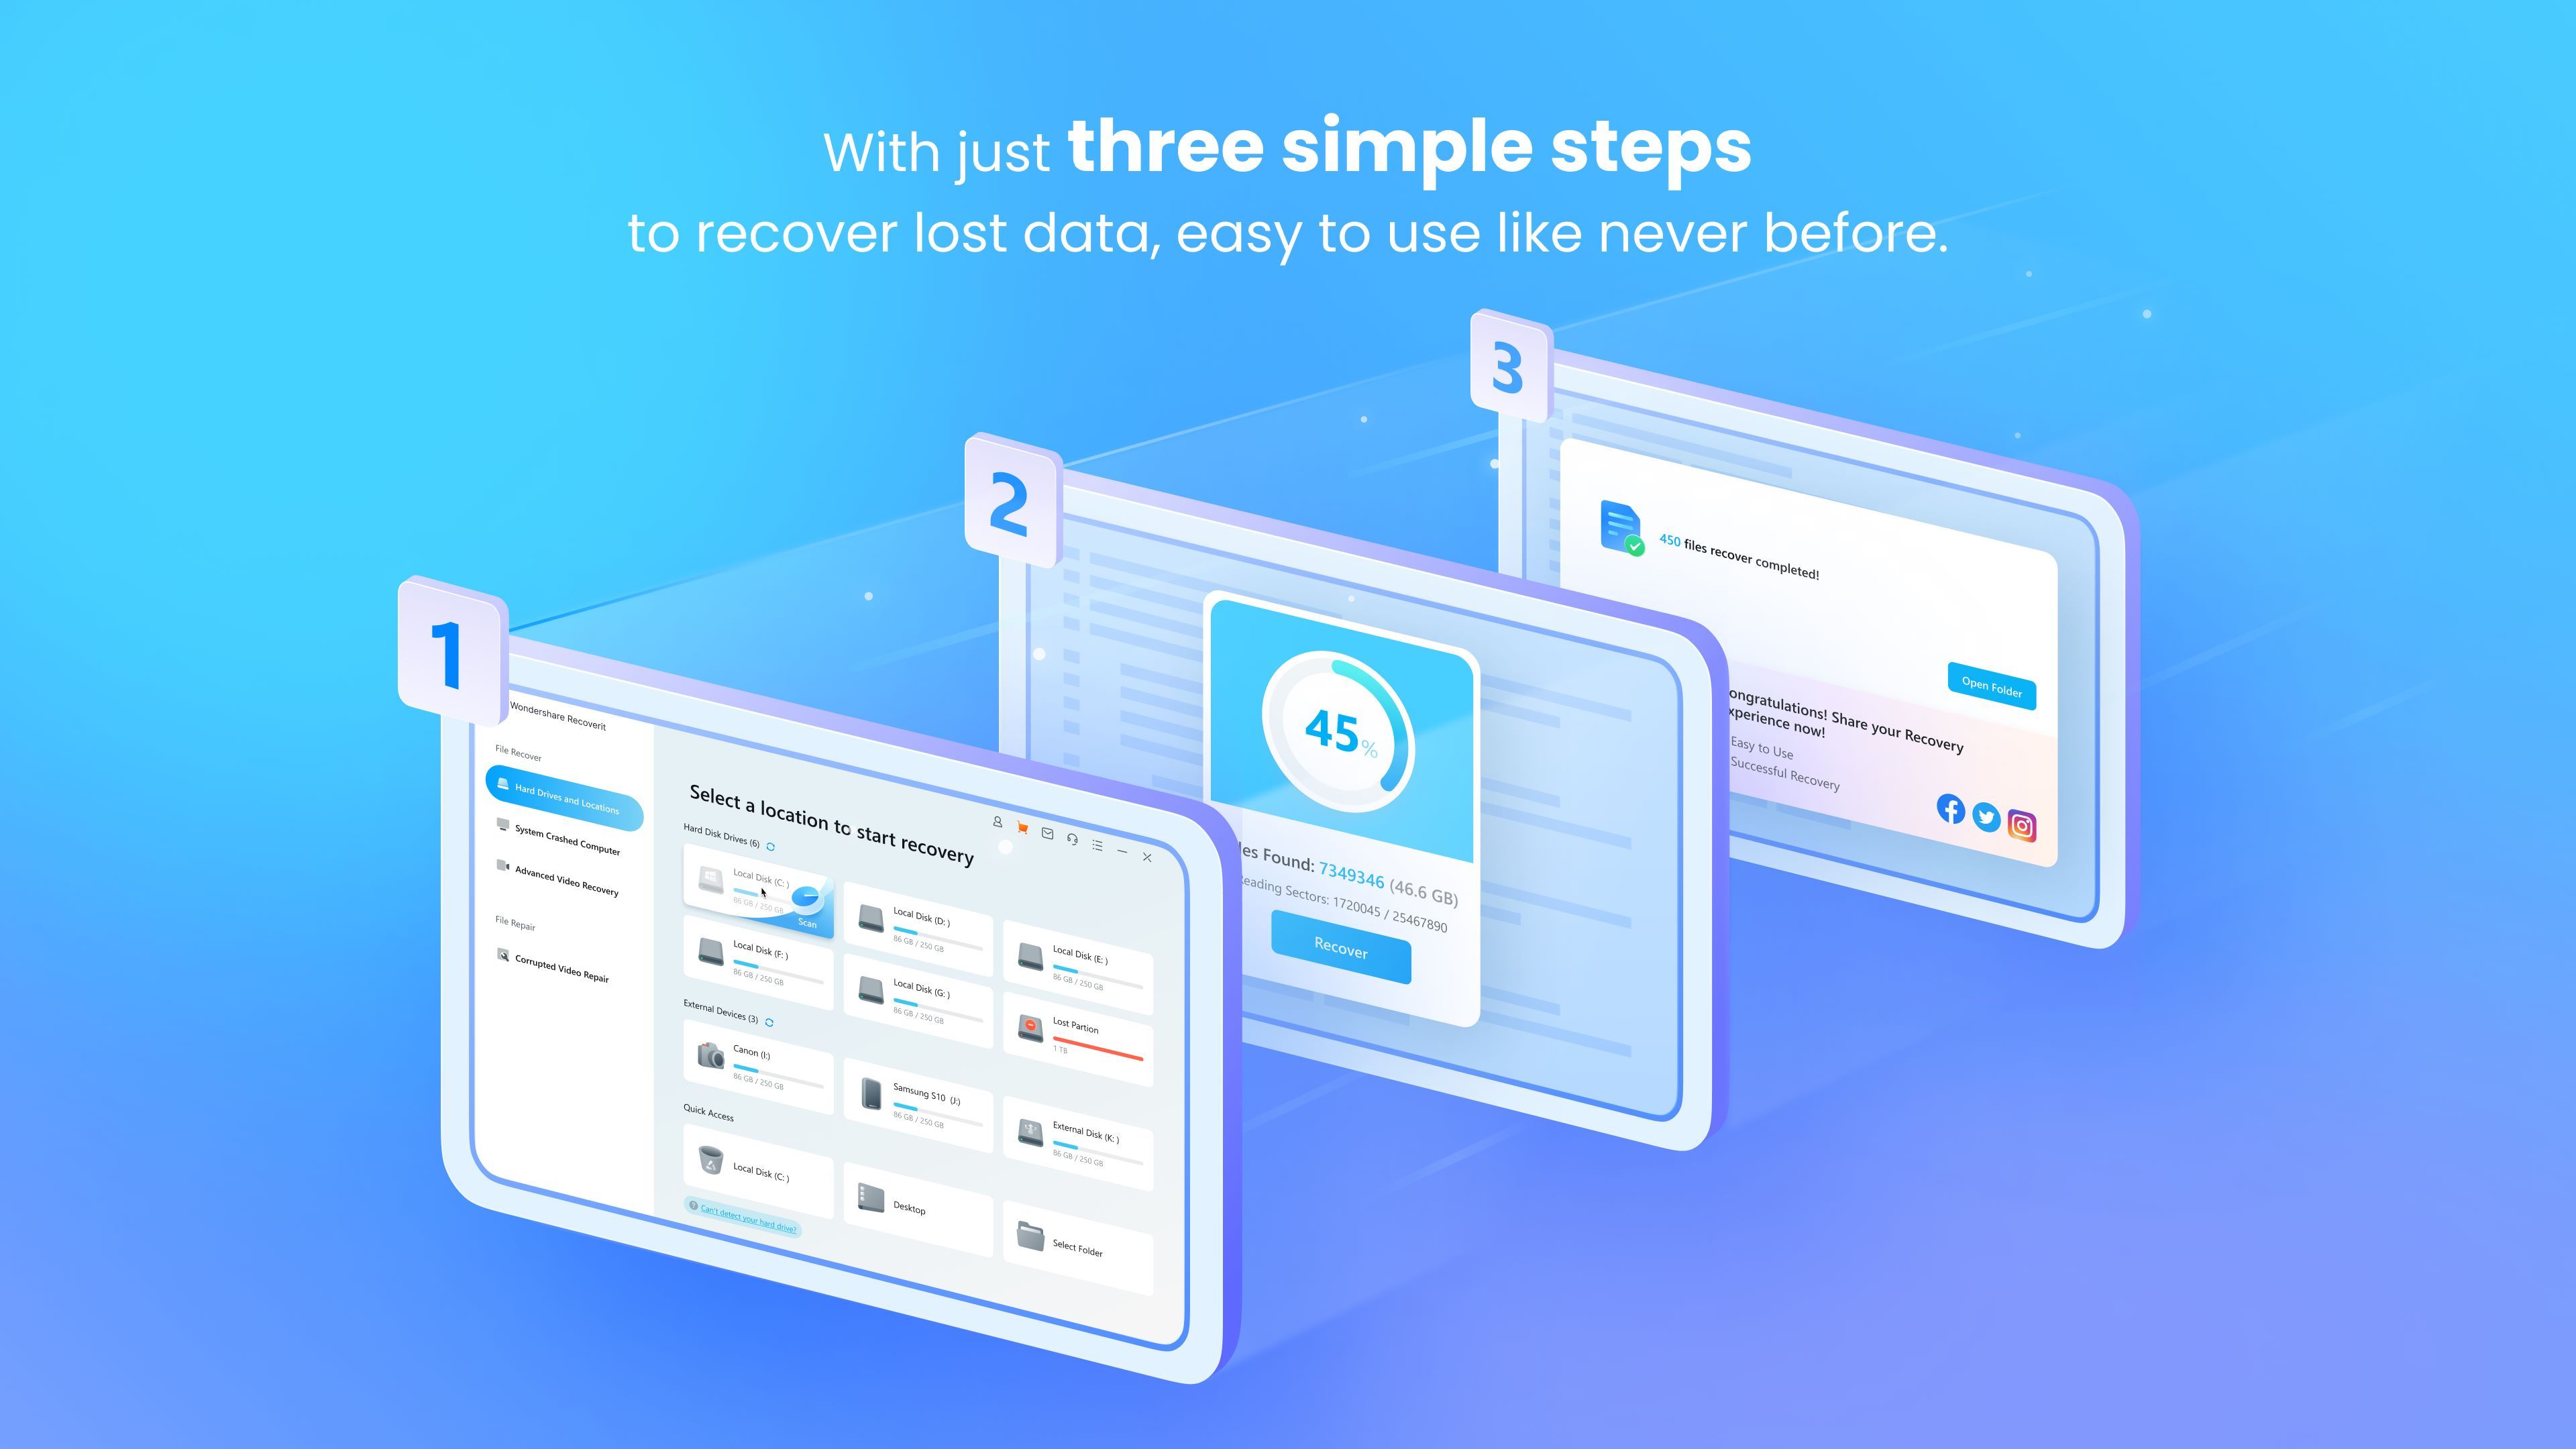 Wondershare Recoverit - Data Recovery, Advanced Video Recovery